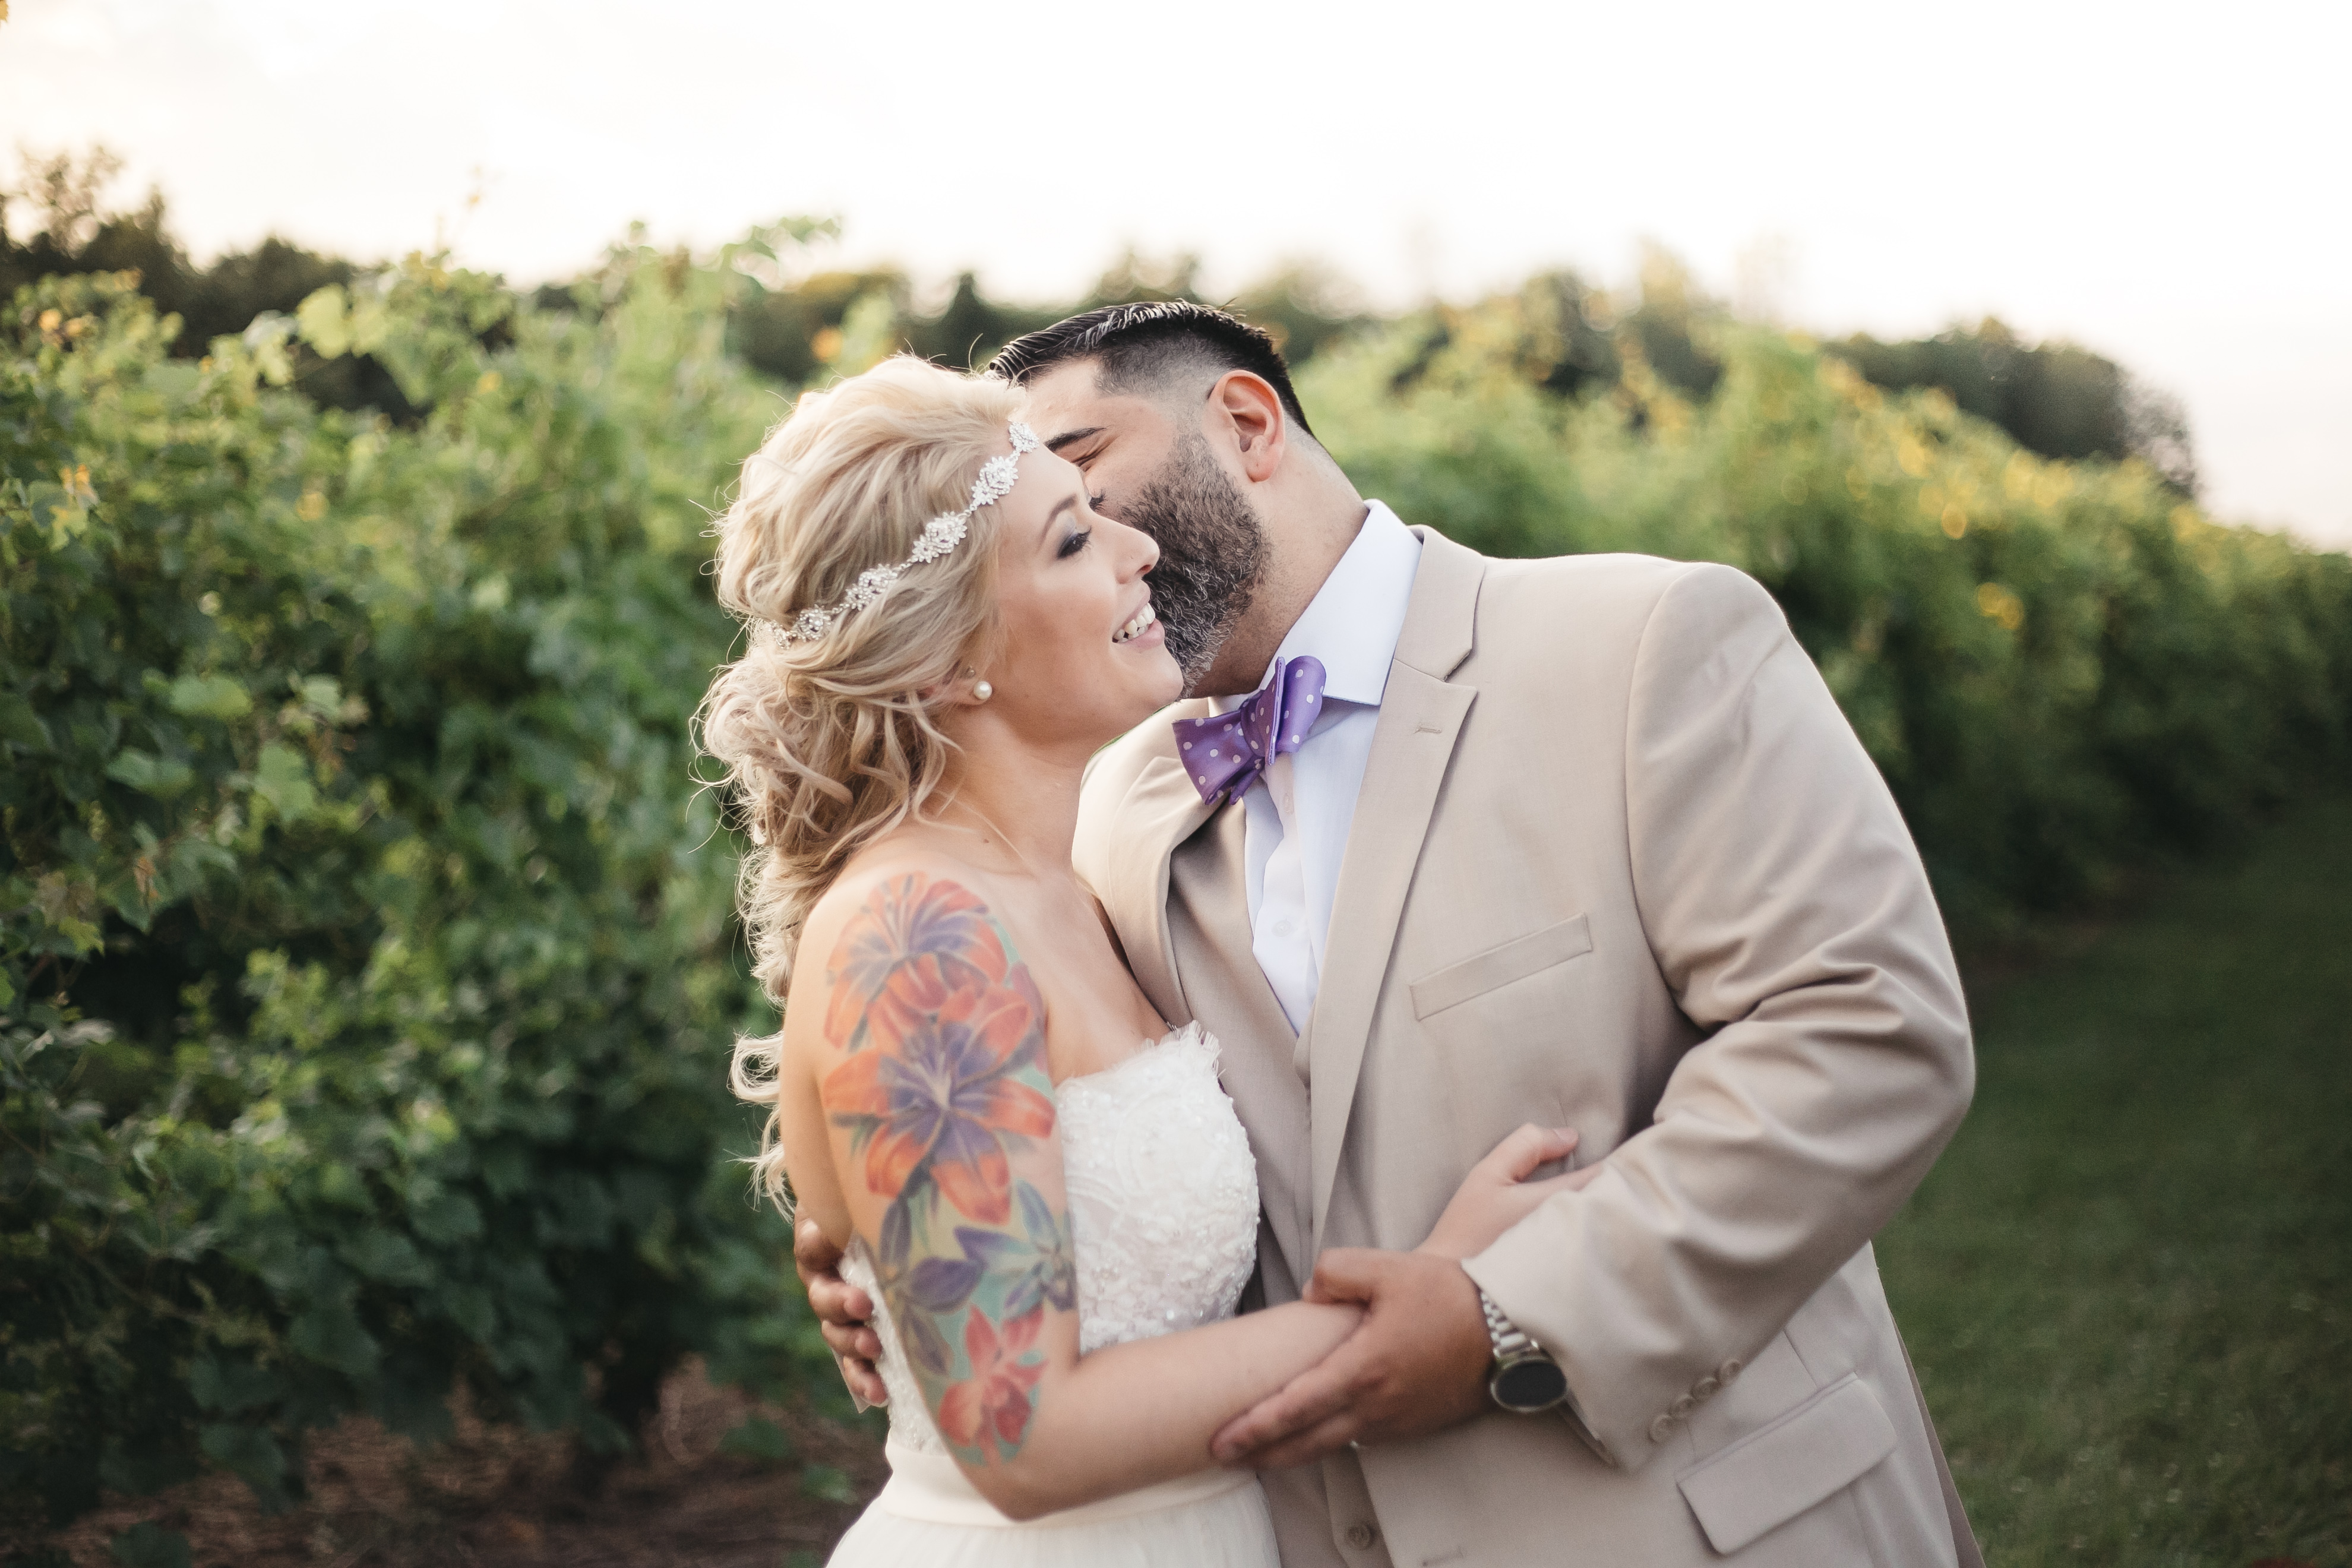 Gasport New York Wedding at Becker Farms and Vizcarra Vineyards by Emi Rose Studio (137 of 169)